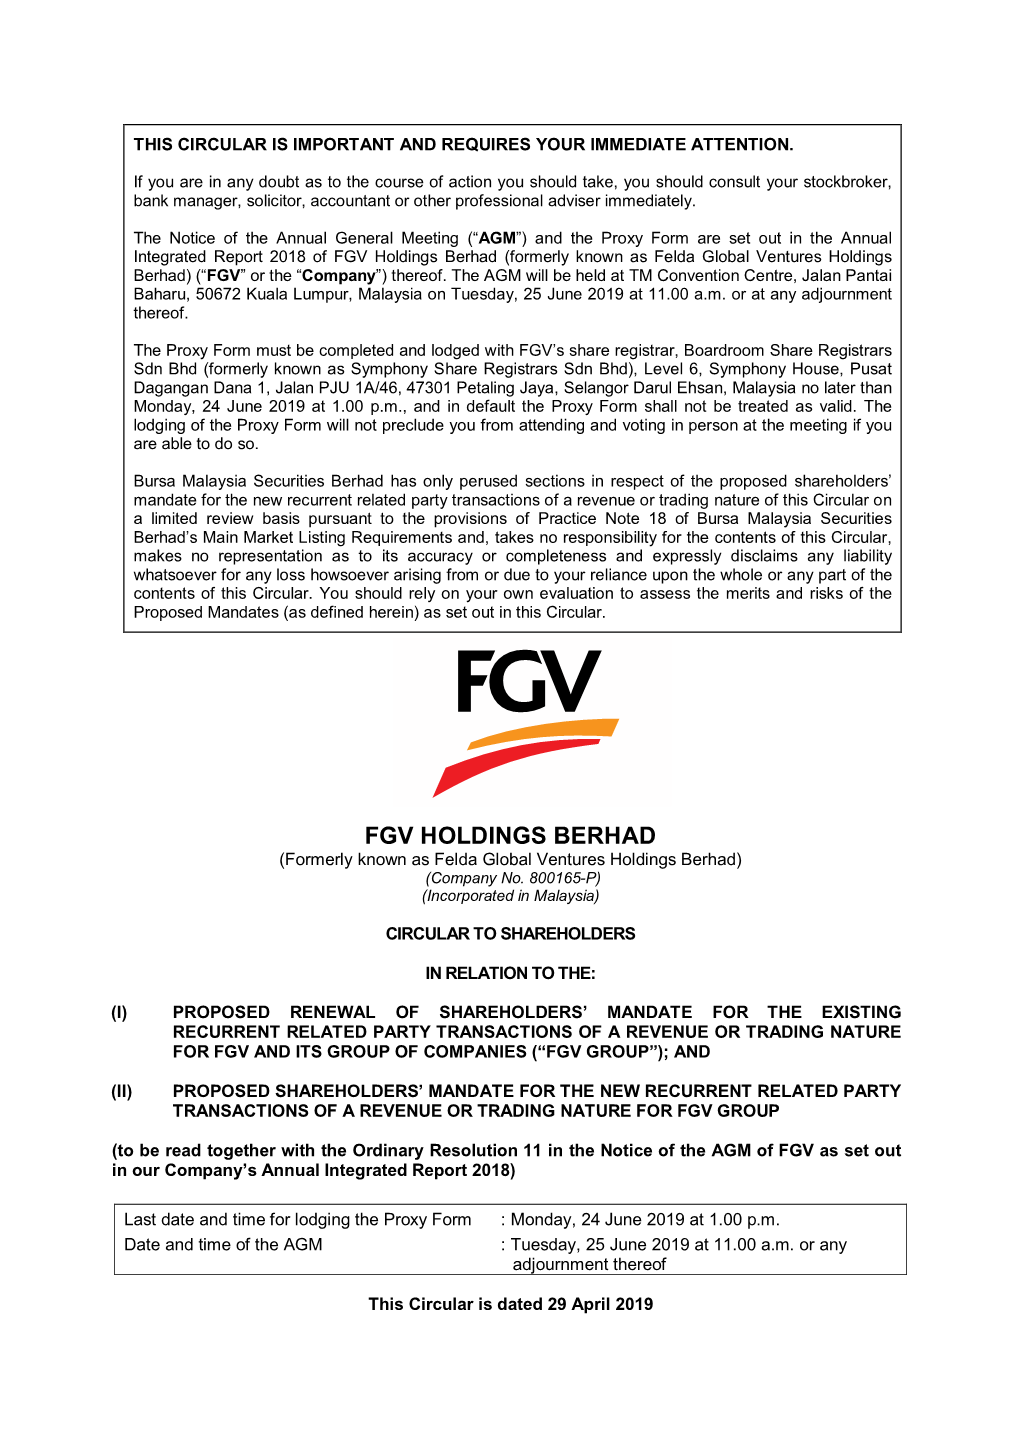 FGV Holdings Berhad (Formerly Known As Felda Global Ventures Holdings Berhad) (“FGV” Or the “Company”) Thereof